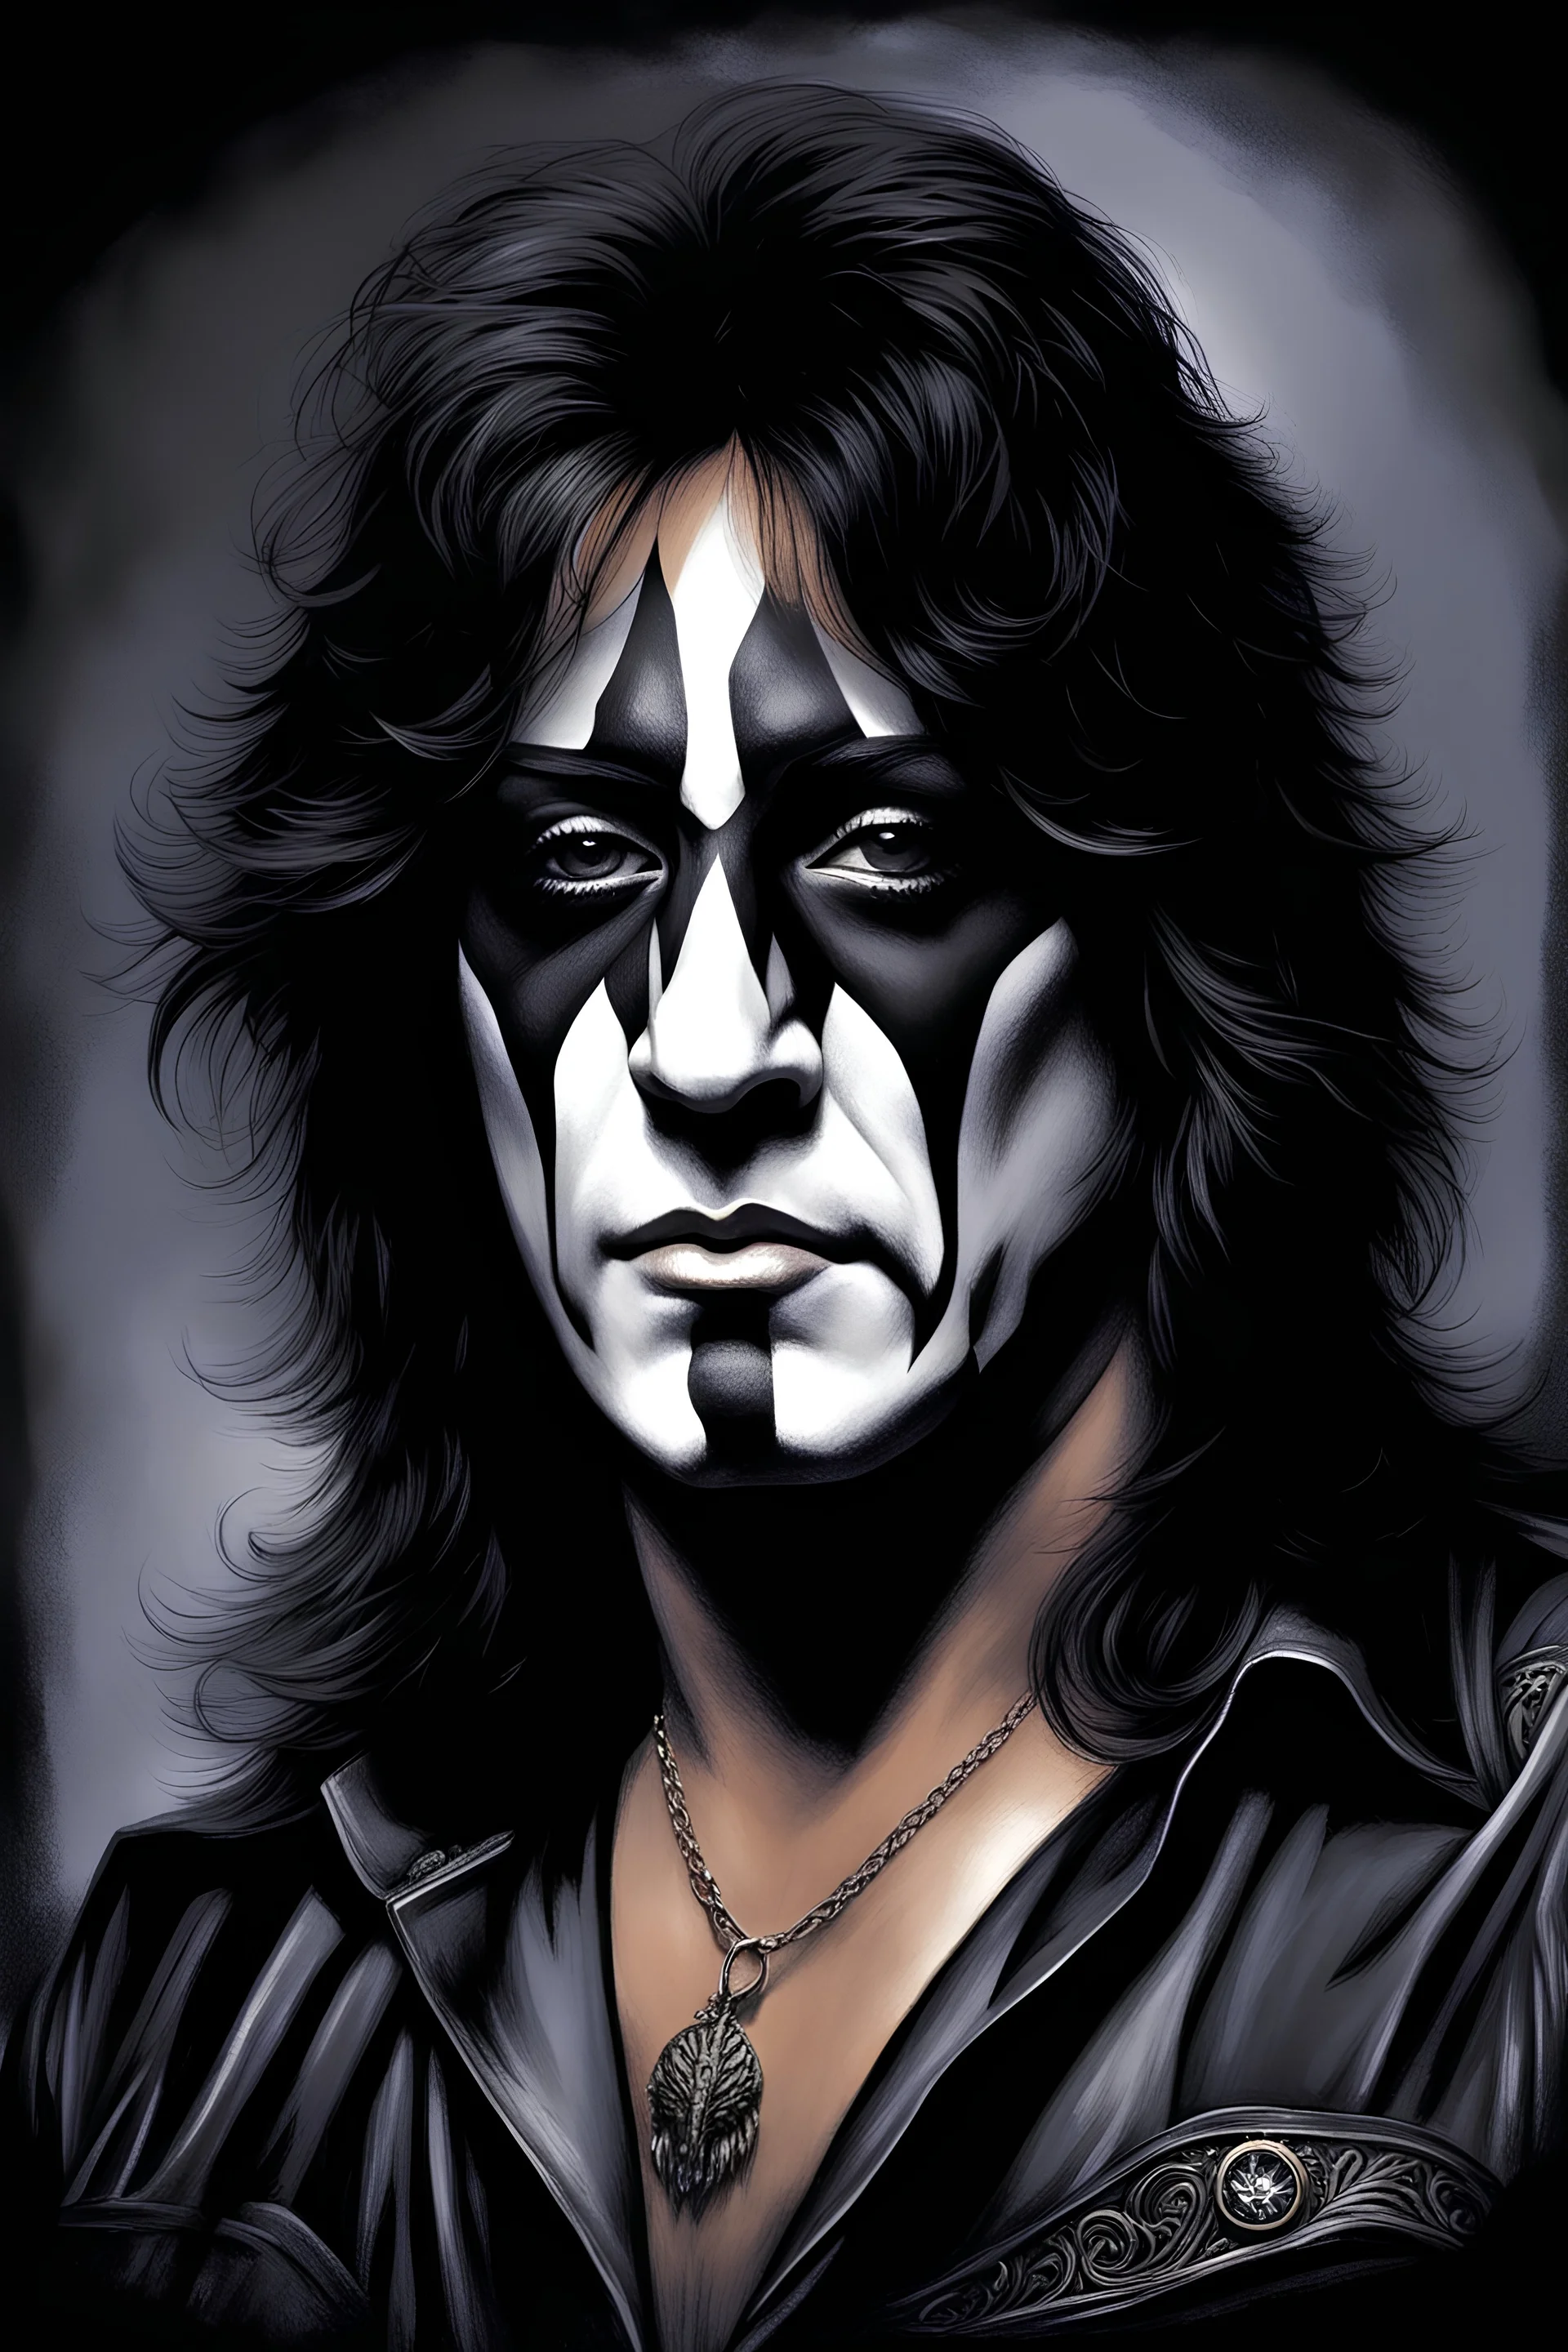 30-year-old Peter Criss (Drummer) with shoulder length, wavy, straight black and gray hair, with his face made up to look like a cat's face - in the art style of Boris Vallejo, Frank Frazetta, Julie bell, Caravaggio, Rembrandt, Michelangelo, Picasso, Gilbert Stuart, Gerald Brom, Thomas Kinkade, Neal Adams, Jim Lee, Sanjulian, Thomas Kinkade, Jim Lee, Alex Ross,